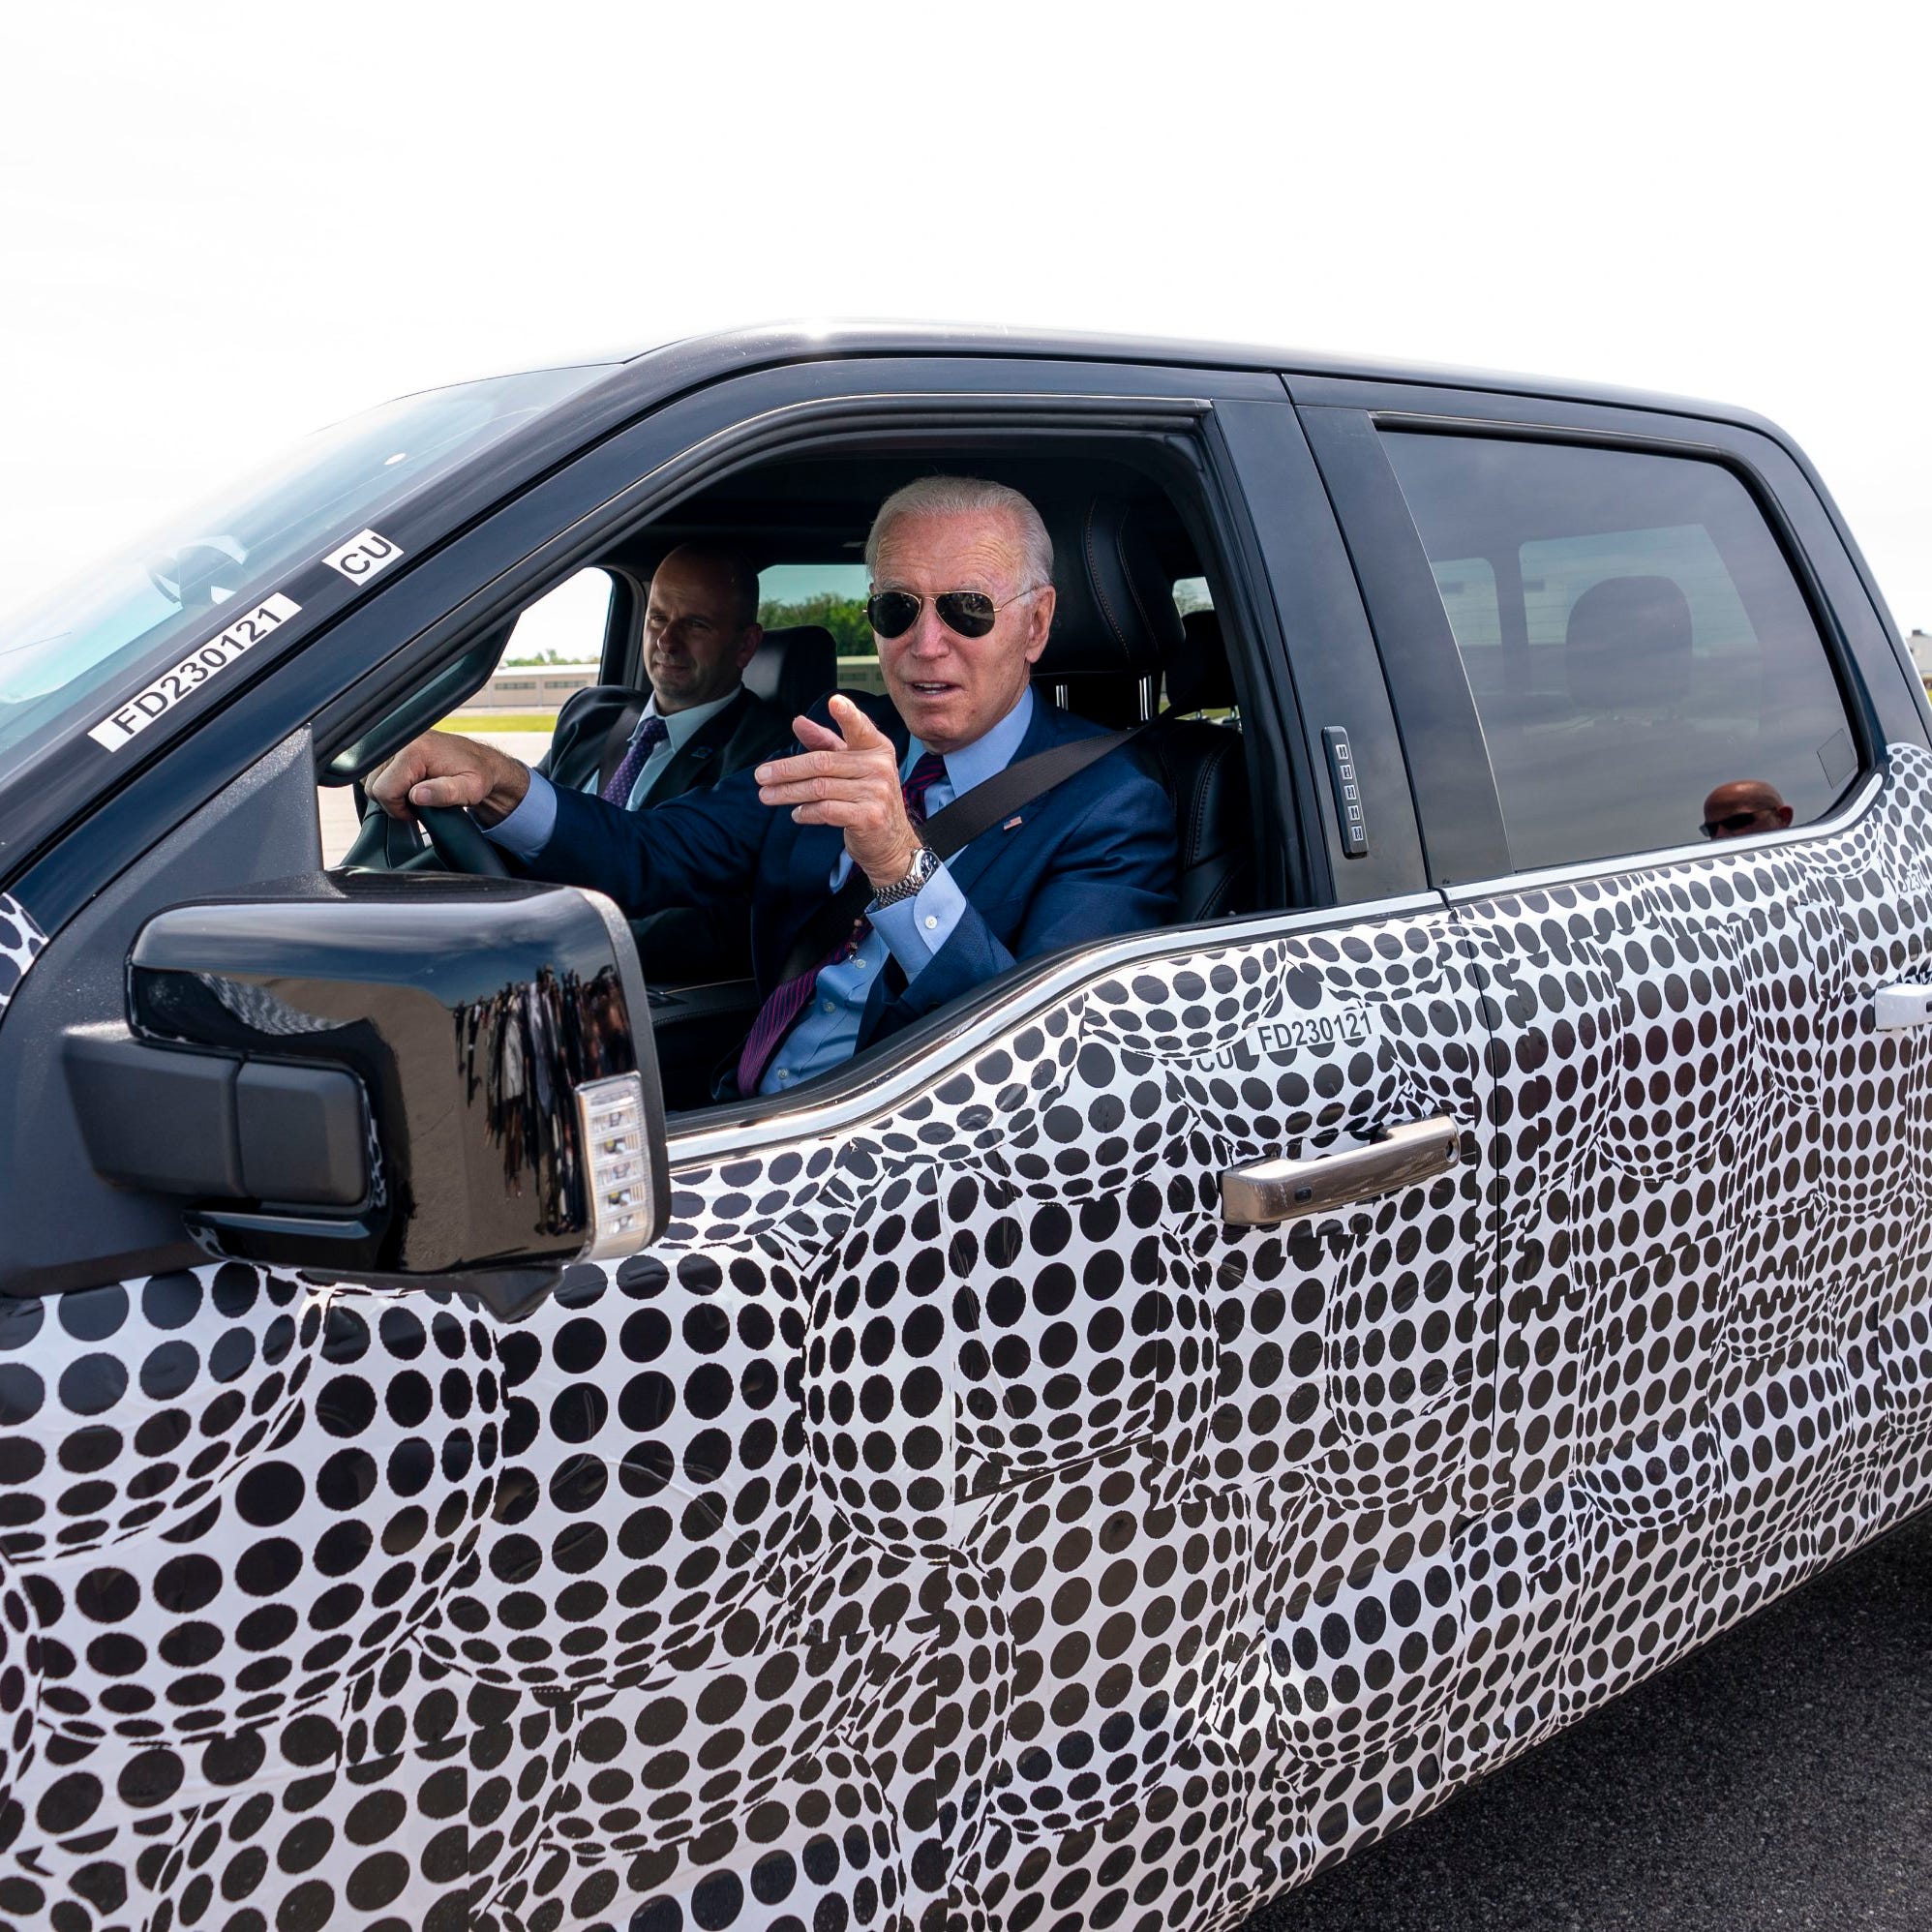 FILE Ñ President Joe Biden drives FordÕs electric pickup truck, the F-150 Lightning, at the automakerÕs development center in Dearborn, Mich., May 18, 2021. Government scientists have spent a year analyzing electric vehicles to help the Environmental Protection Agency (EPA) design new tailpipe rules to trigger an electric car revolution. (Doug Mills/The New York Times)